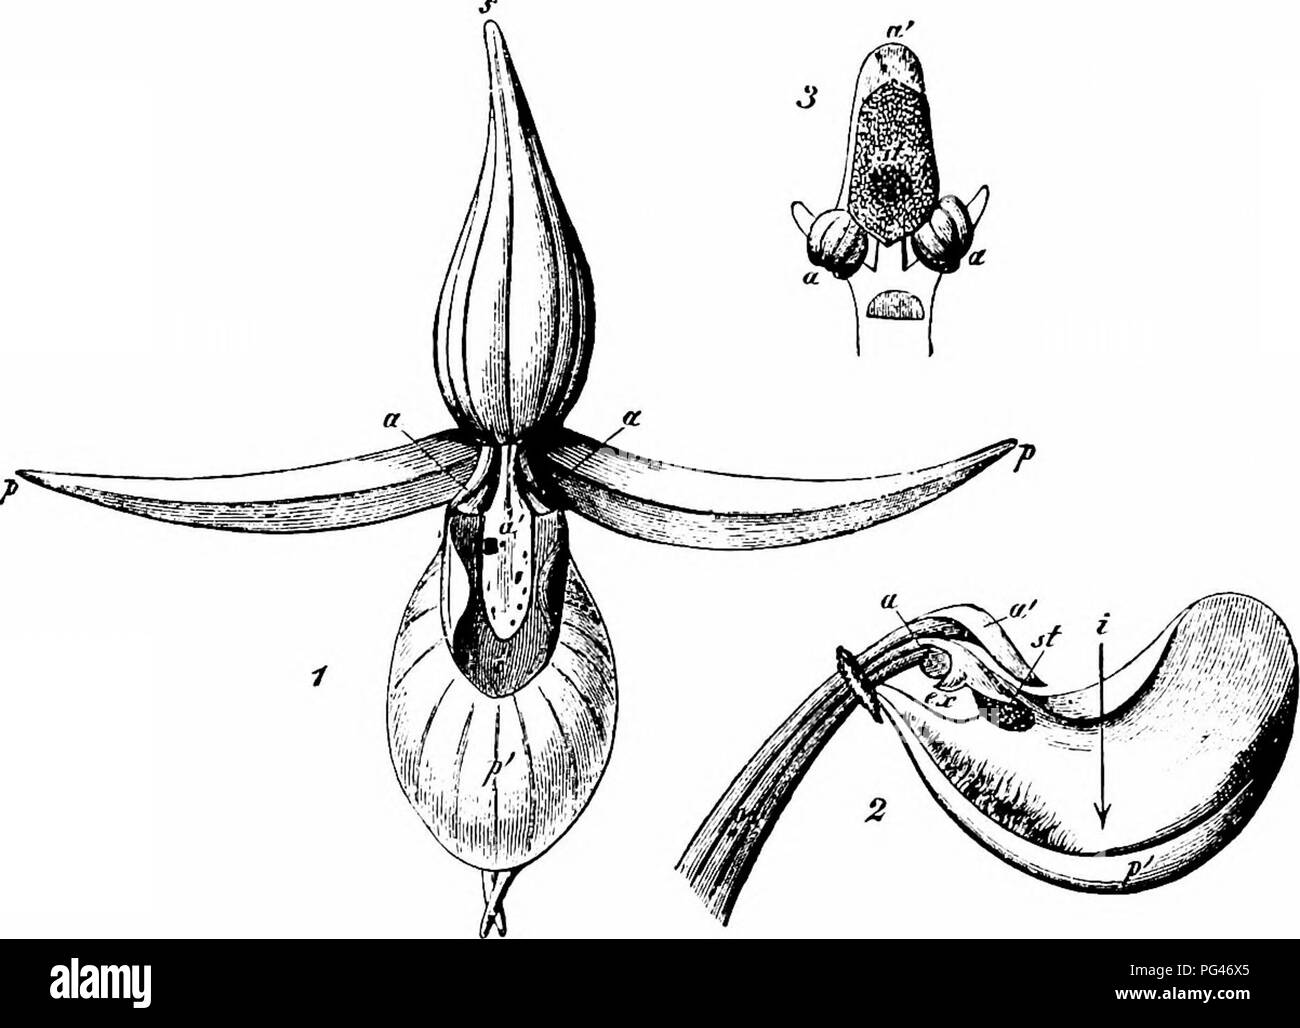 . Handbook of flower pollination : based upon Hermann Mu?ller's work 'The fertilisation of flowers by insects' . Fertilization of plants. 420 ANGIOSPERMAE—MONOCOTYLEDONES 2652. C. Calceolus L. (Herm. MuUer, ' Fertlsn.,' p. 539 ; Baxter, ' Fertlzn. of Cypripedium'; Webster, Trans. Bot. Soc, Edinburgh, xvi, 1886, pp. 357-60; Darwin, op. cit., p. 226 ; Kerner, ' Nat. Hist. PI.,' Eng. Ed. i, II, pp. 245, 249.)—In flowers of this species the slightly contracted labellum is yellow in colour, and the rest of the perianth leaves purple. This colouring and an odour of nectar attract small bees of the g Stock Photo